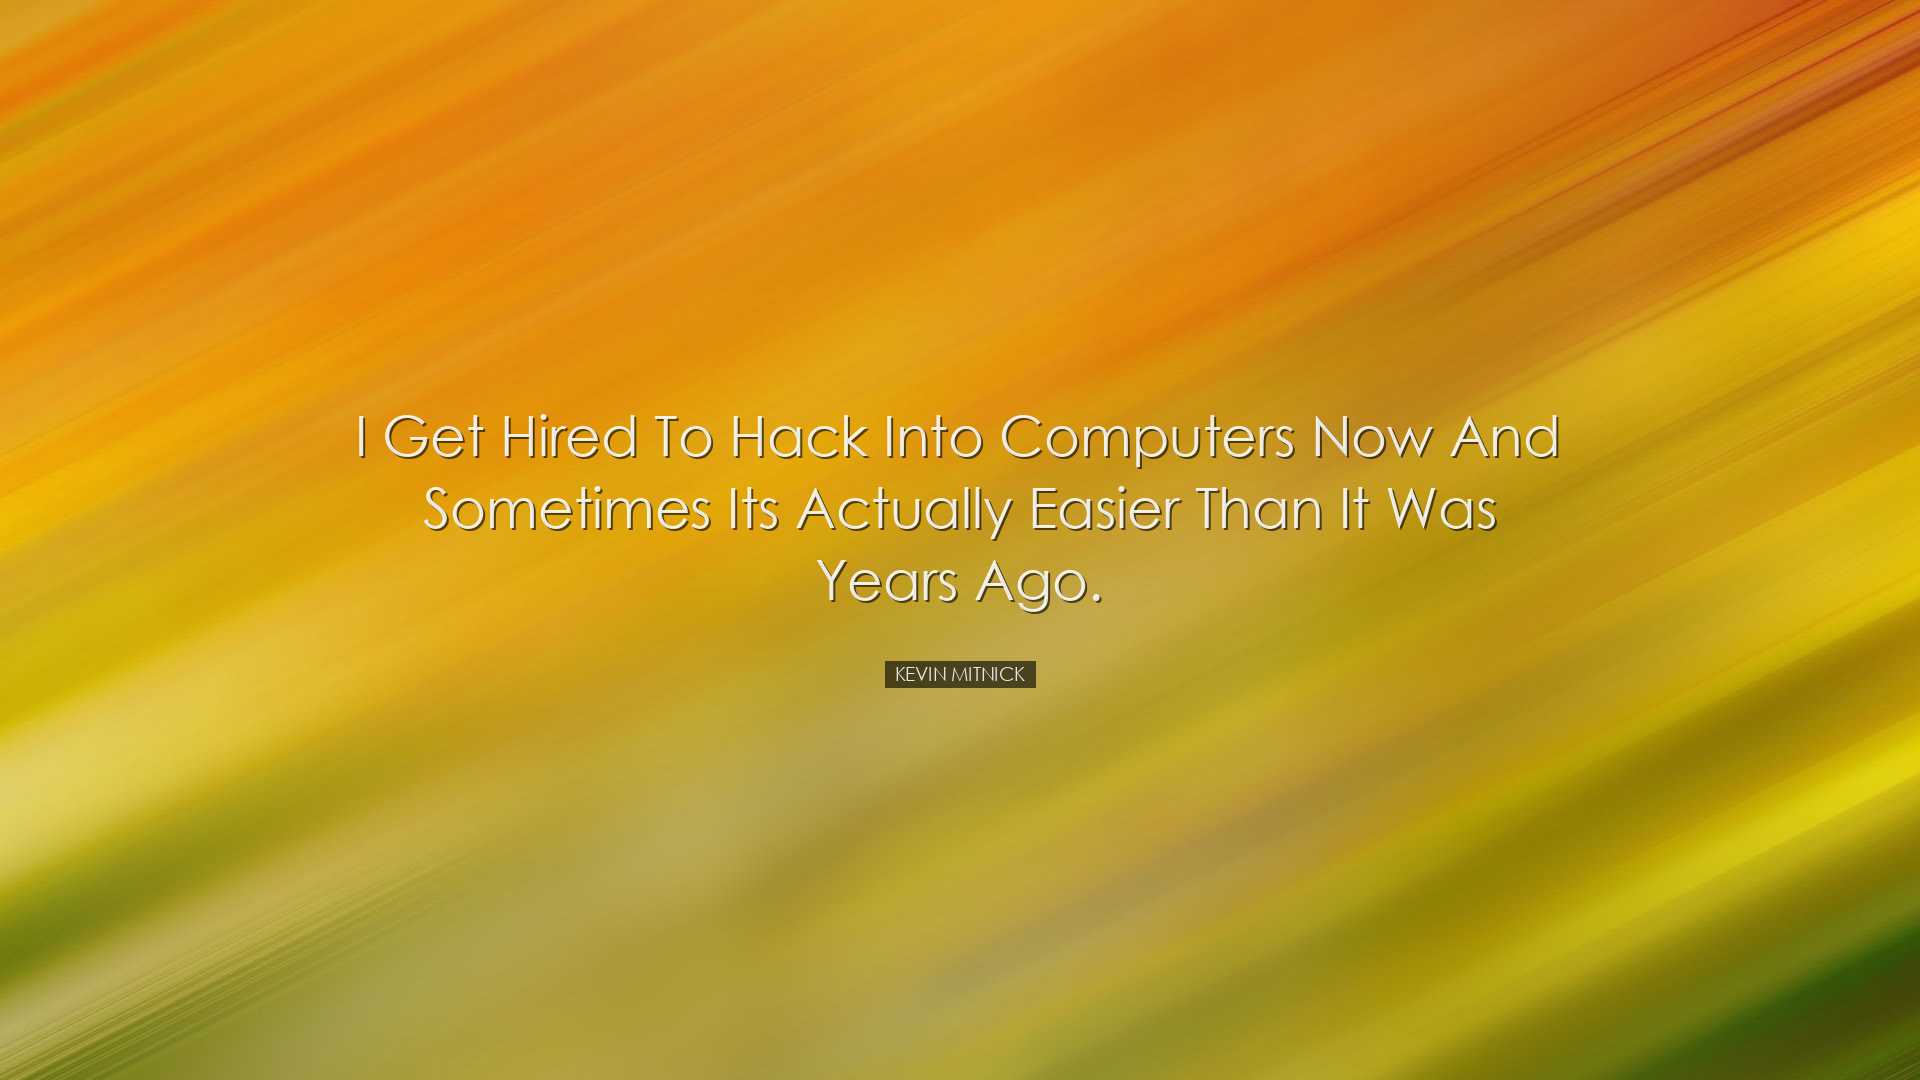 I get hired to hack into computers now and sometimes its actually